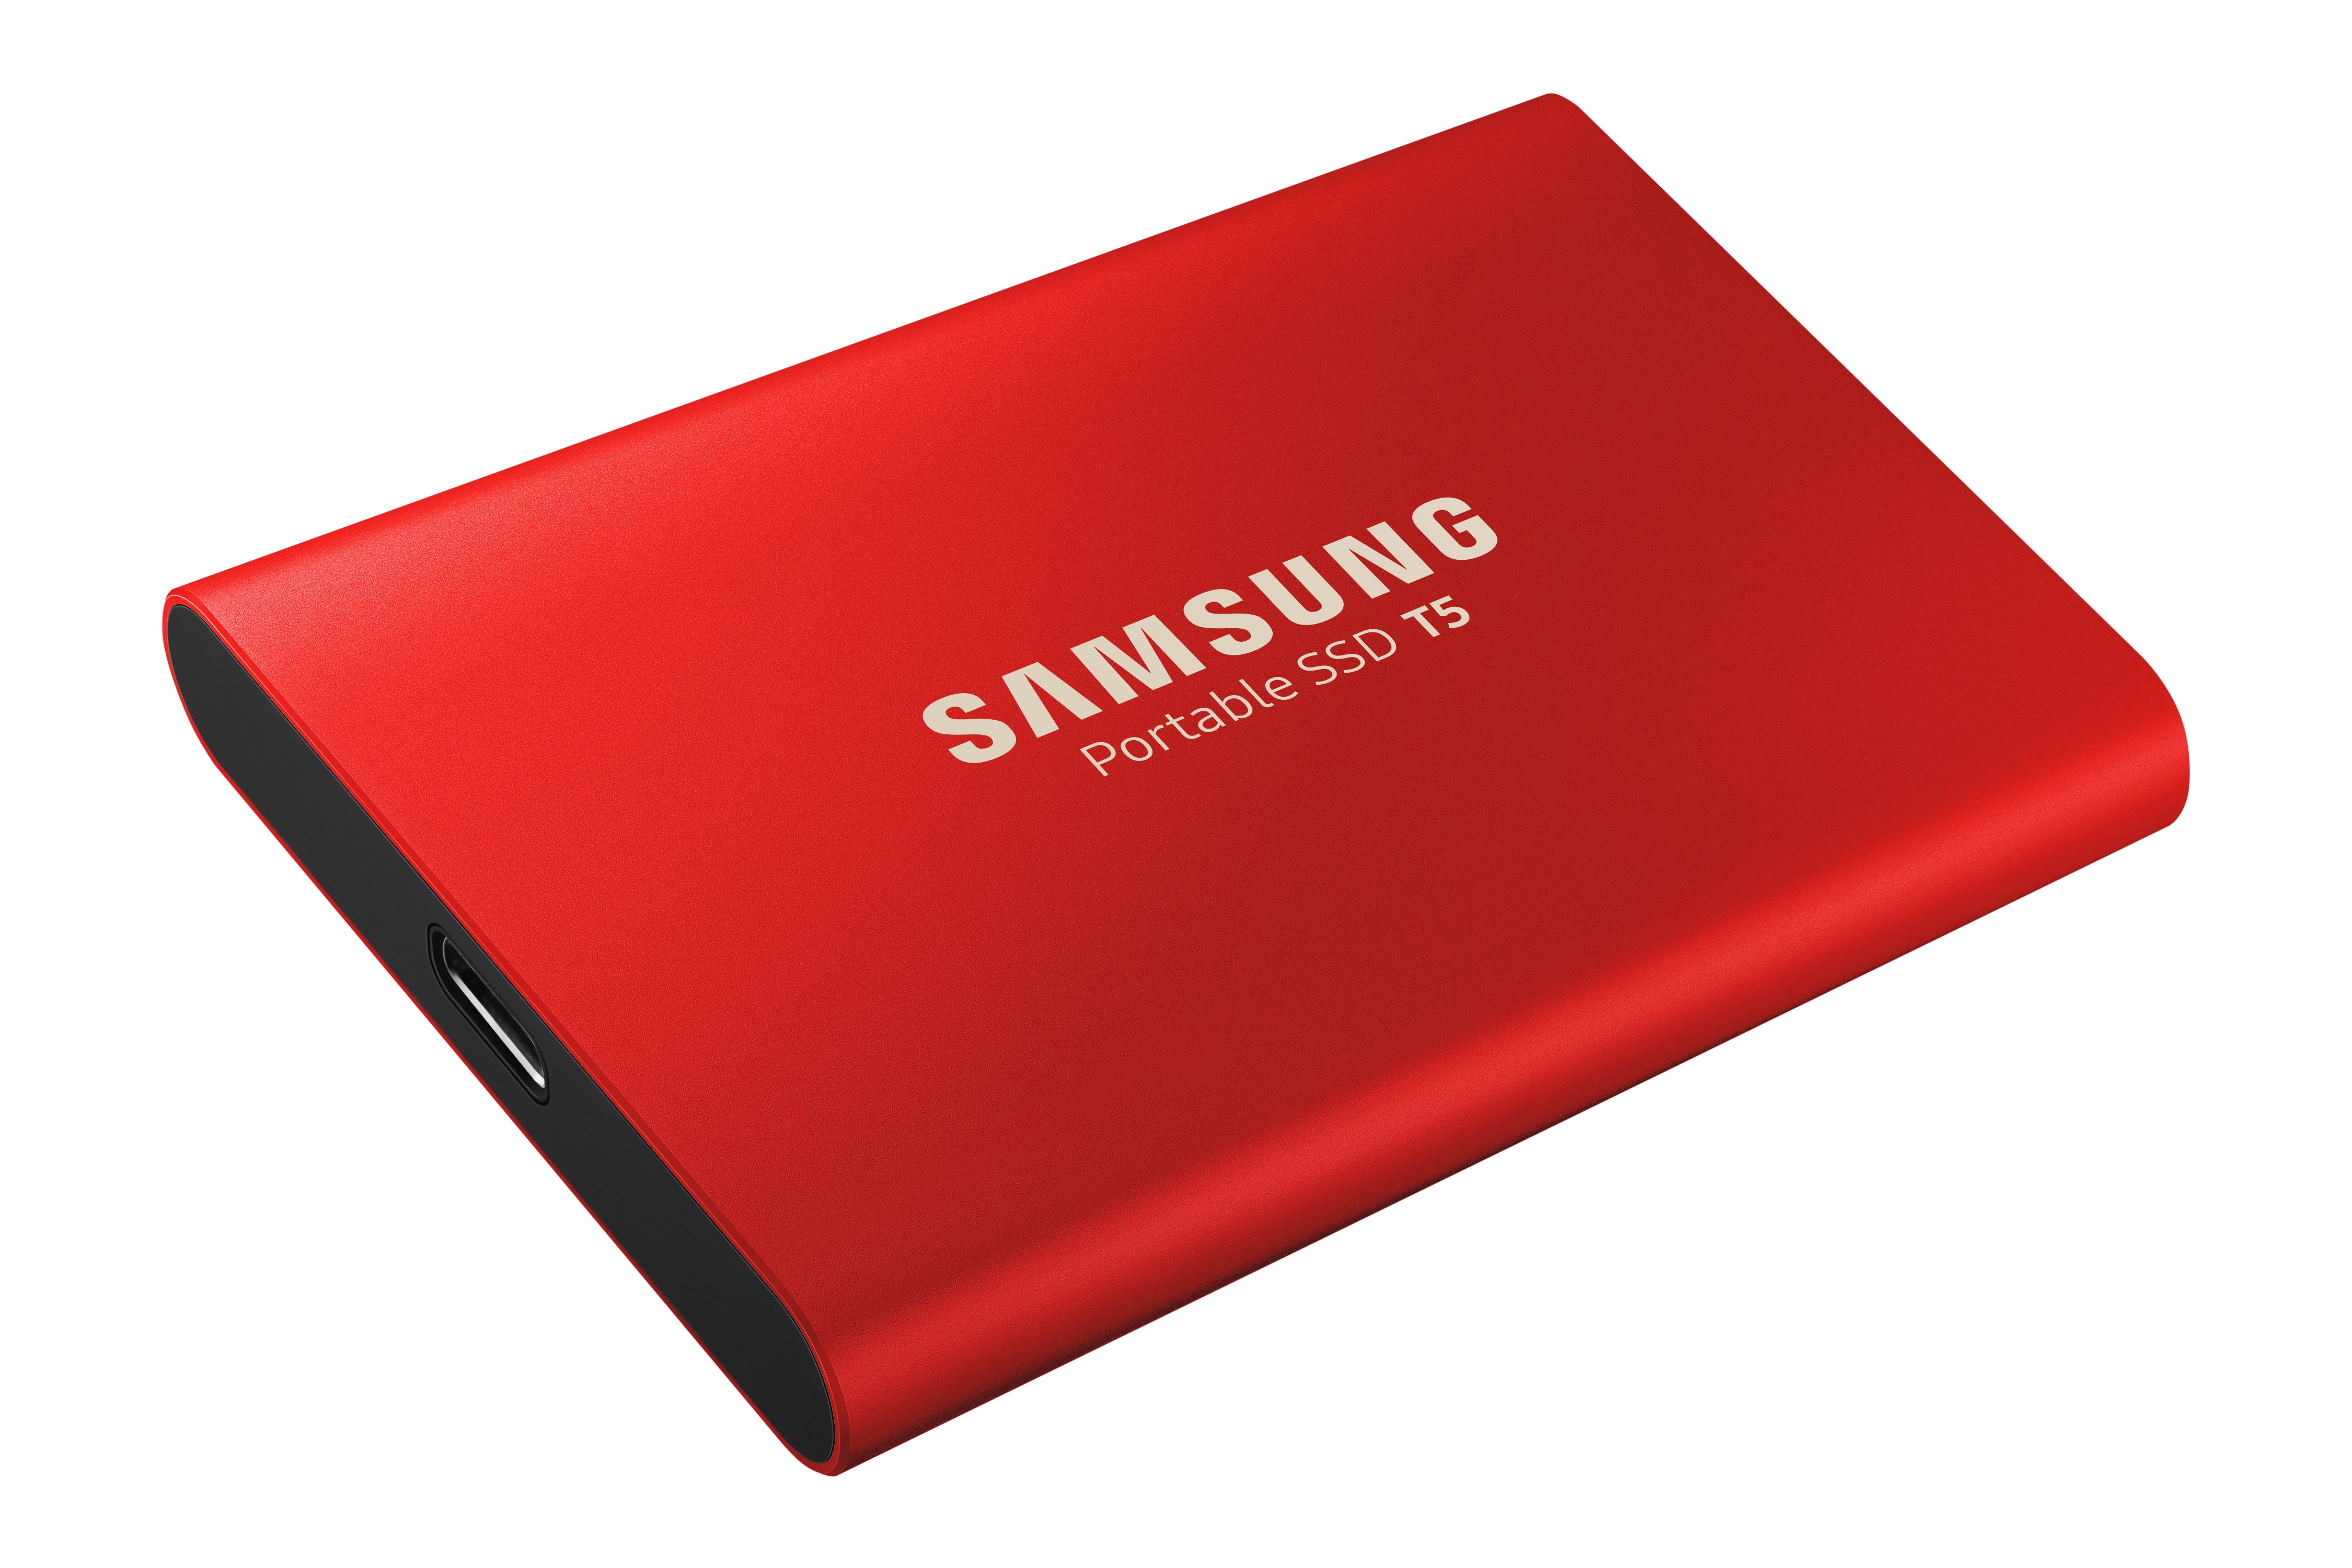 Samsung ssd t5 2to - Cdiscount